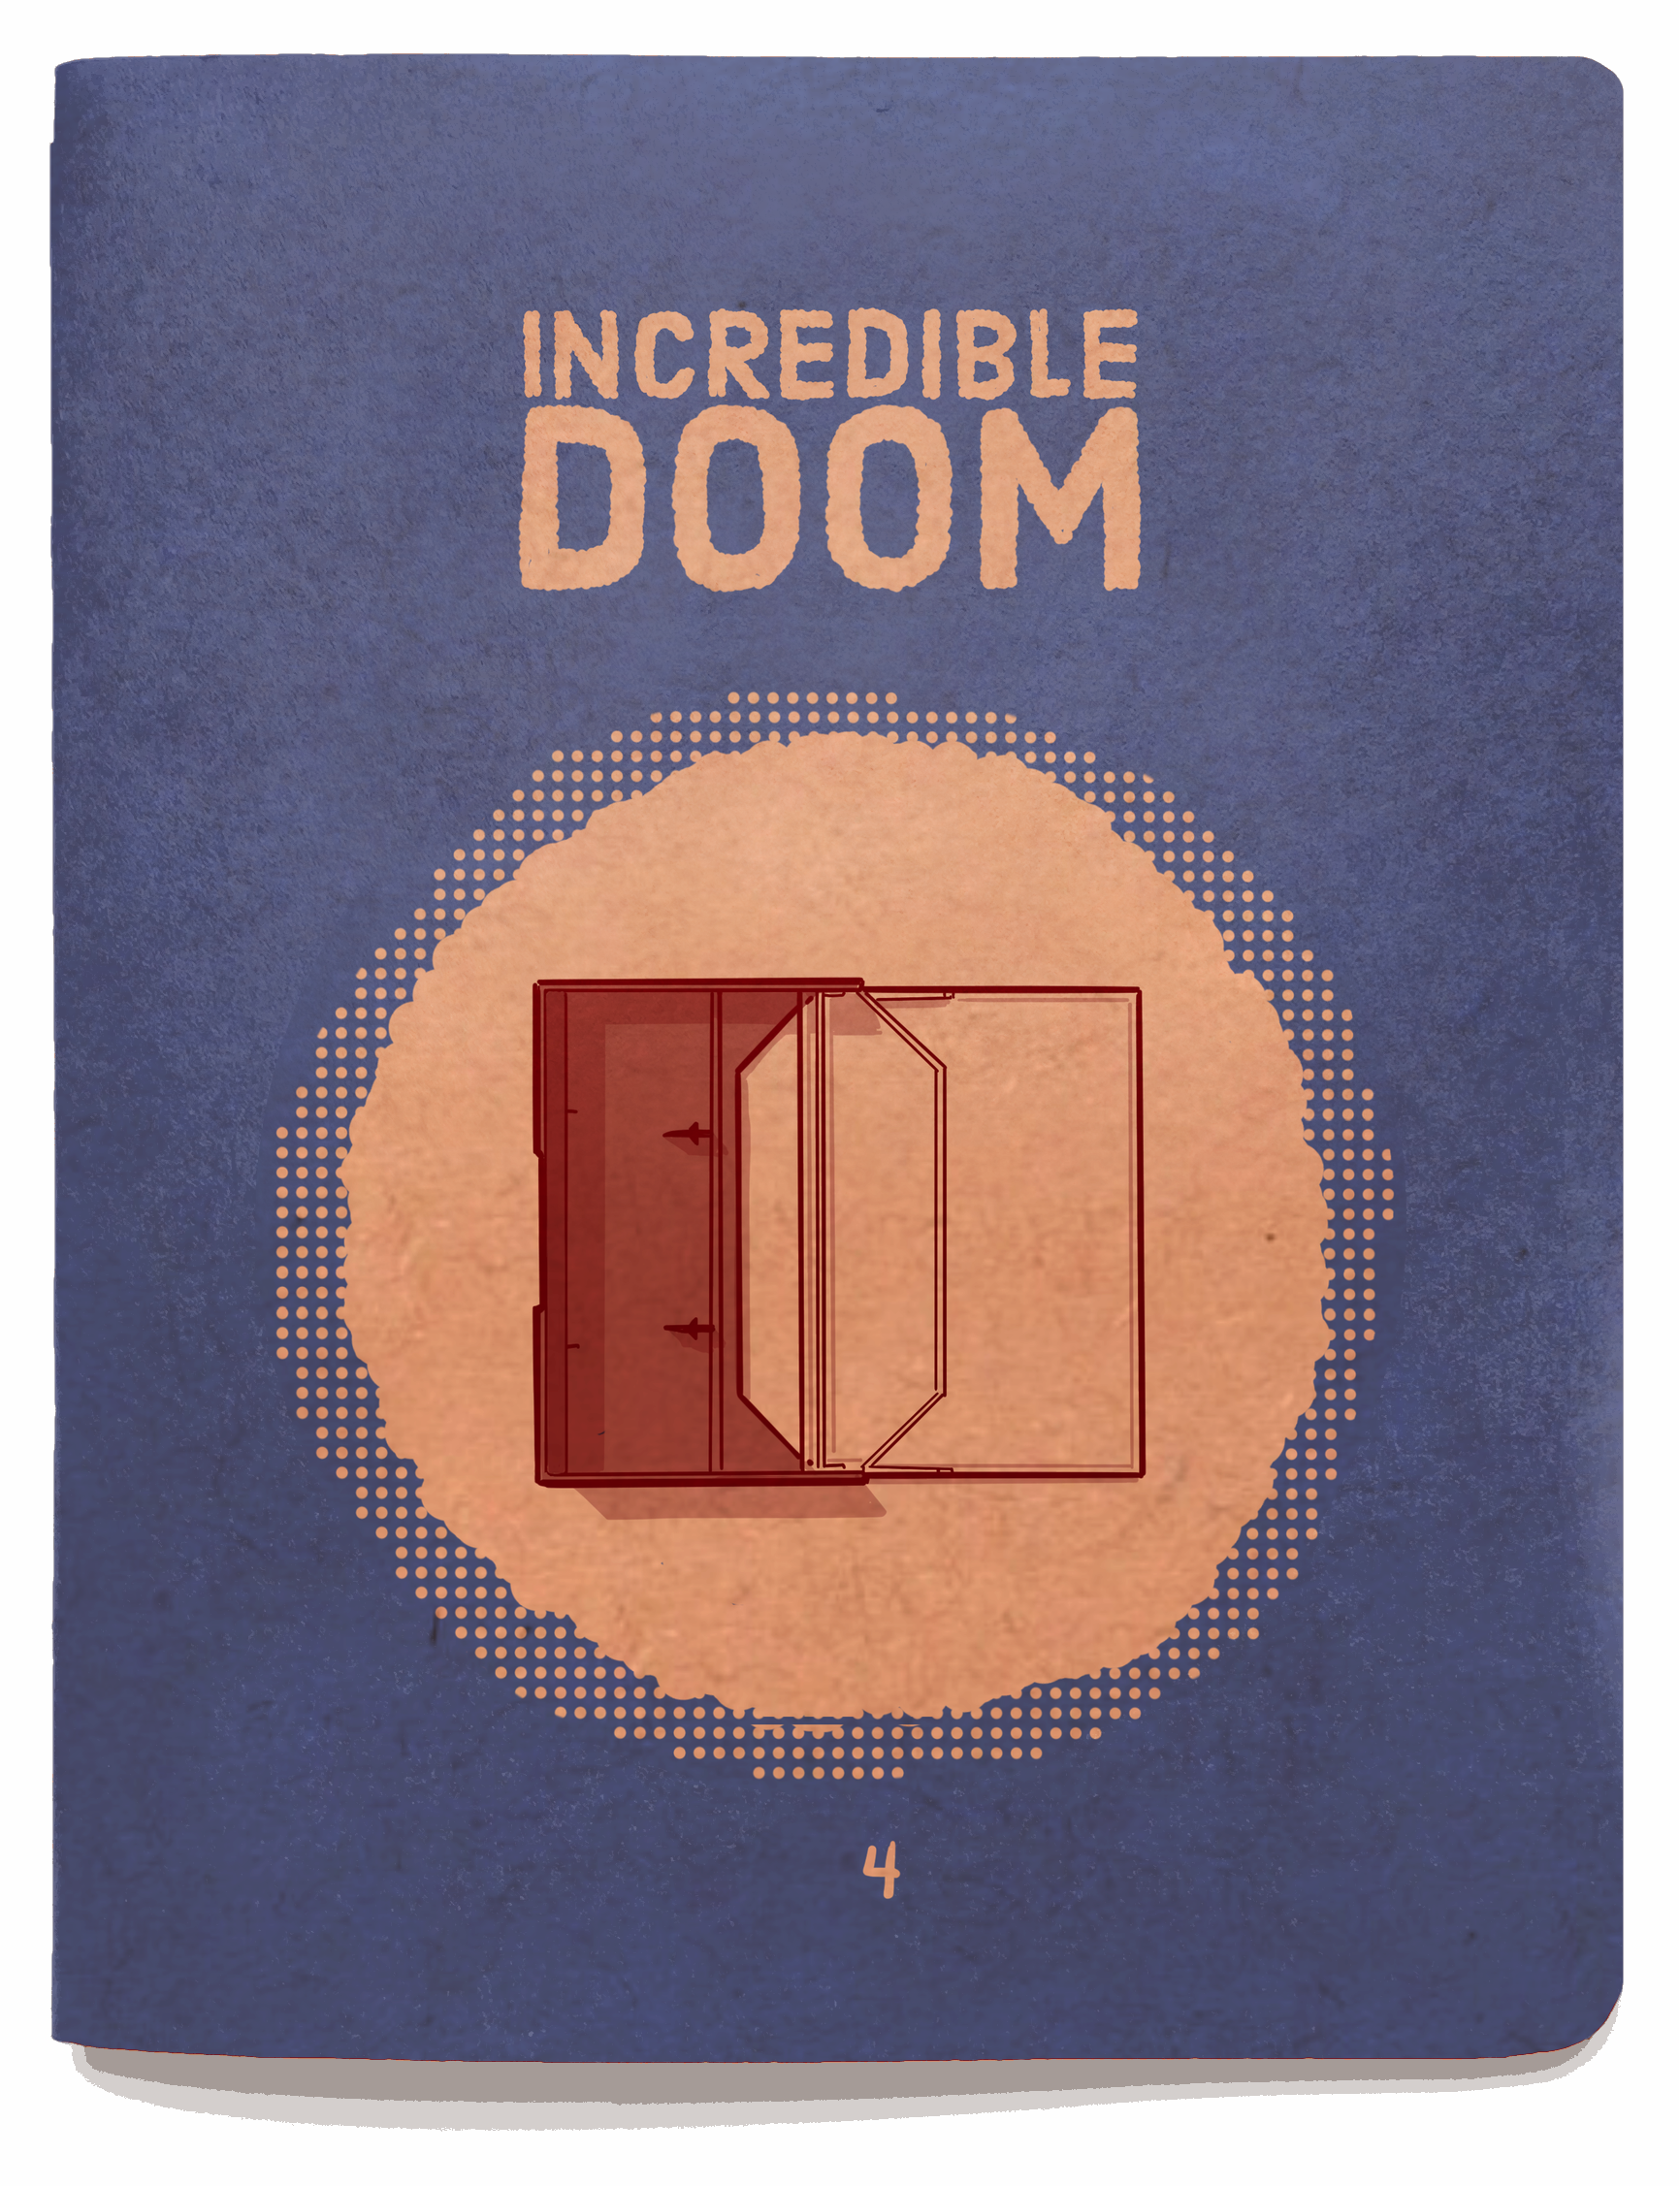 Incredible Doom #4 Cover With Shaddow Template.png